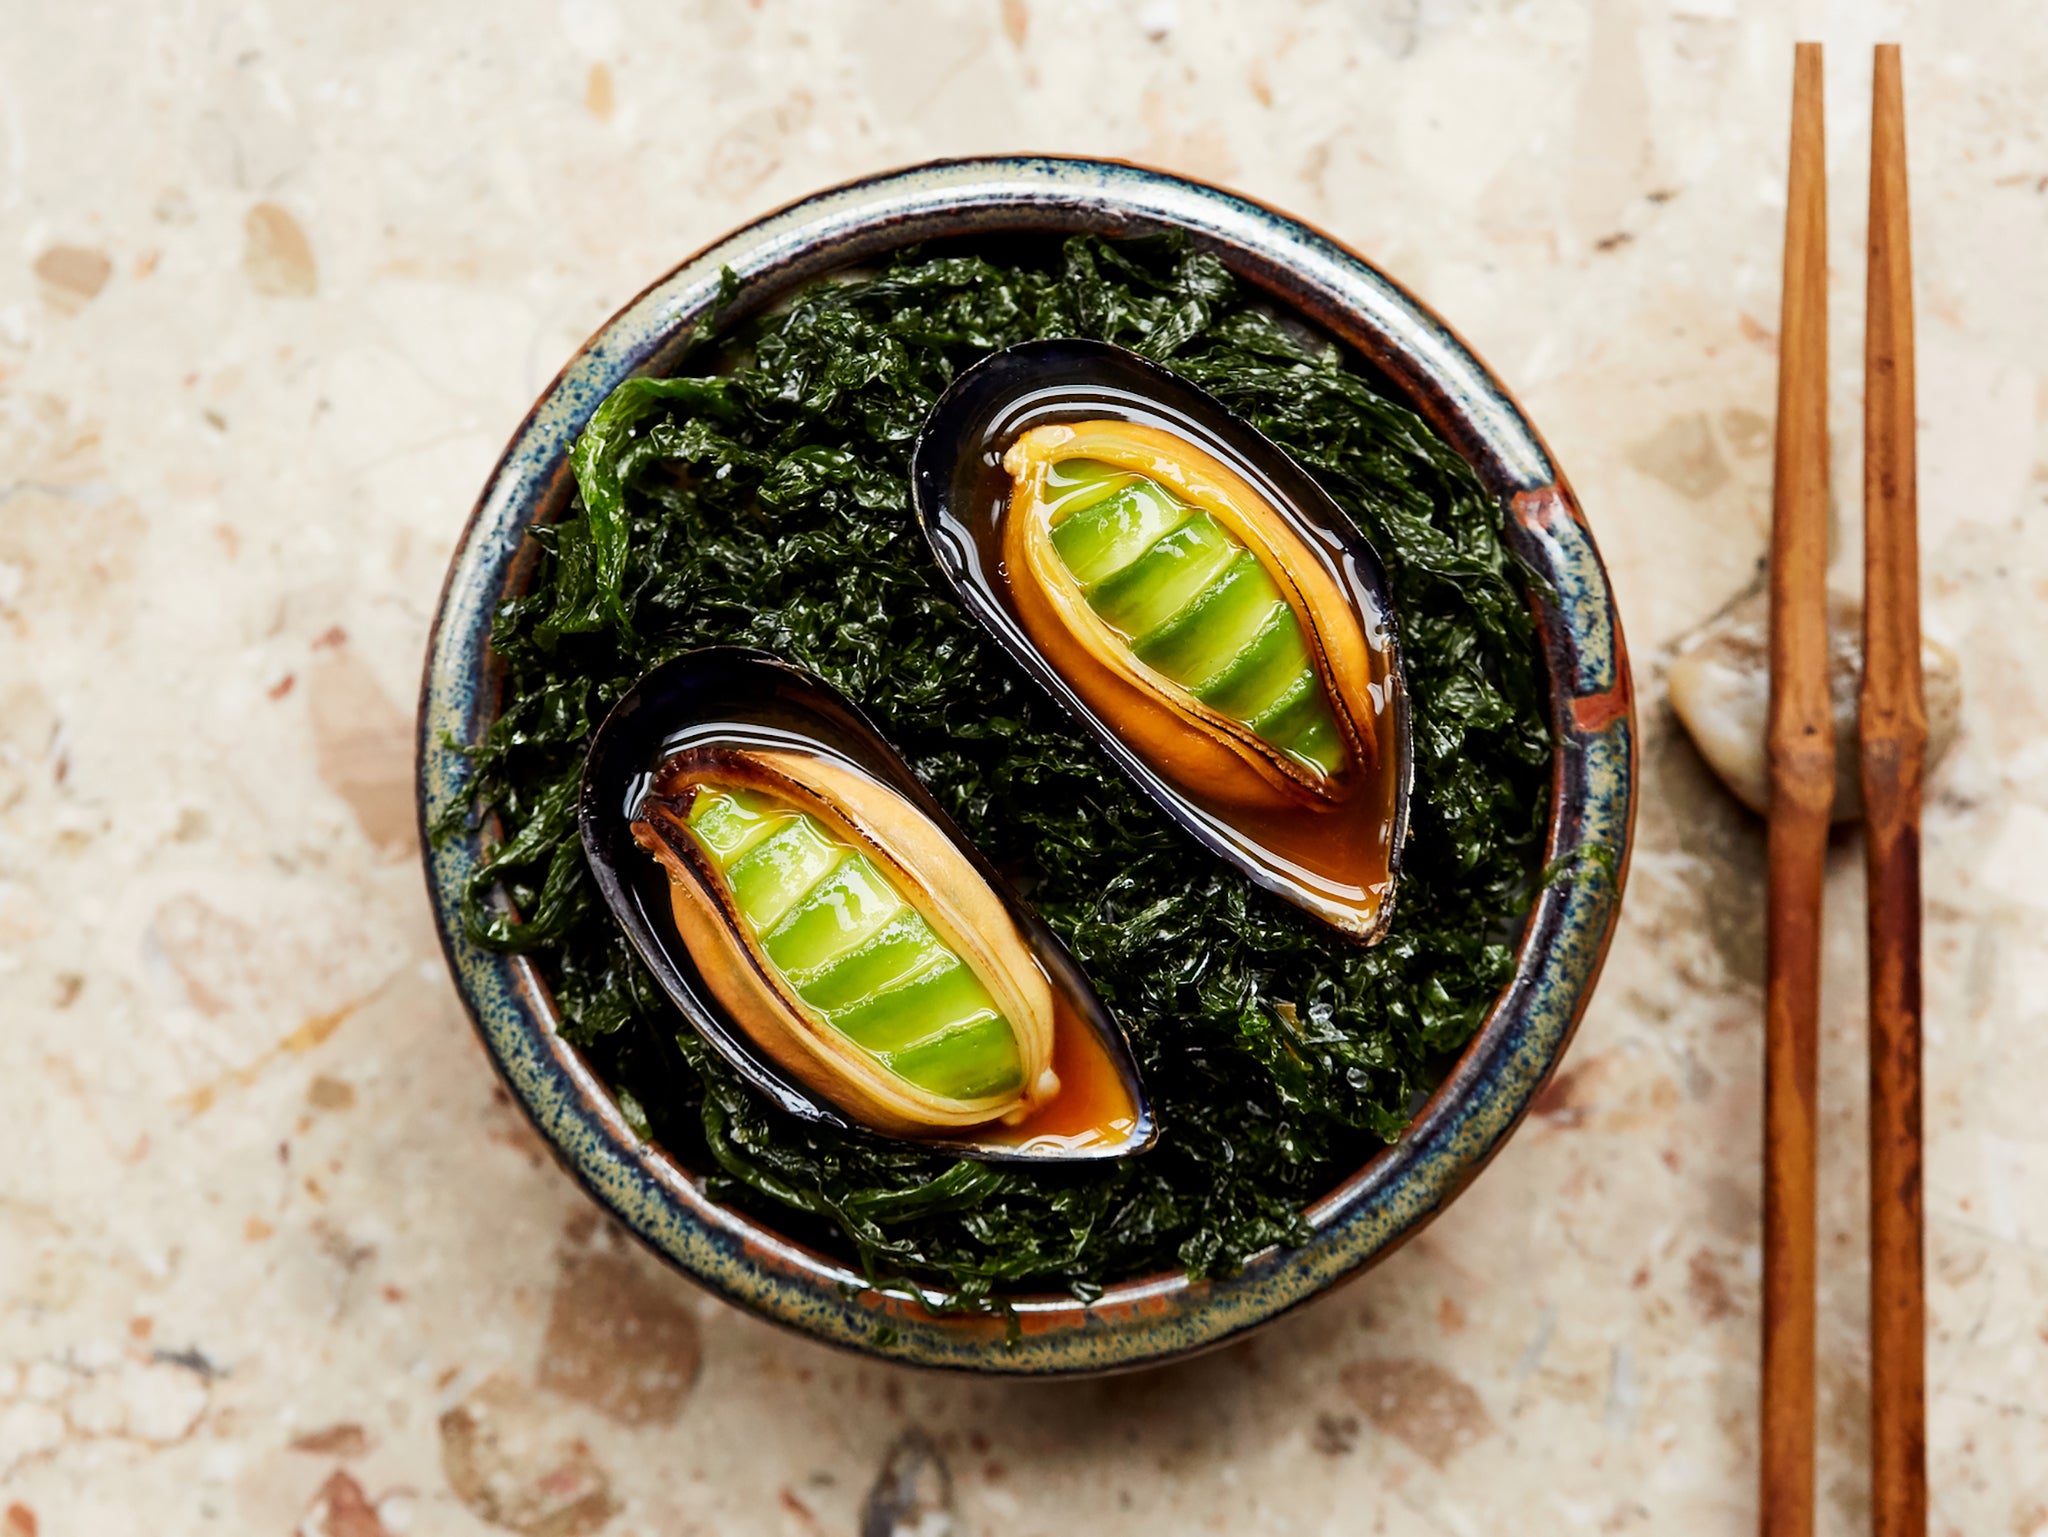 The Shot: the avocado-stuffed mussel has been doing the rounds on social media